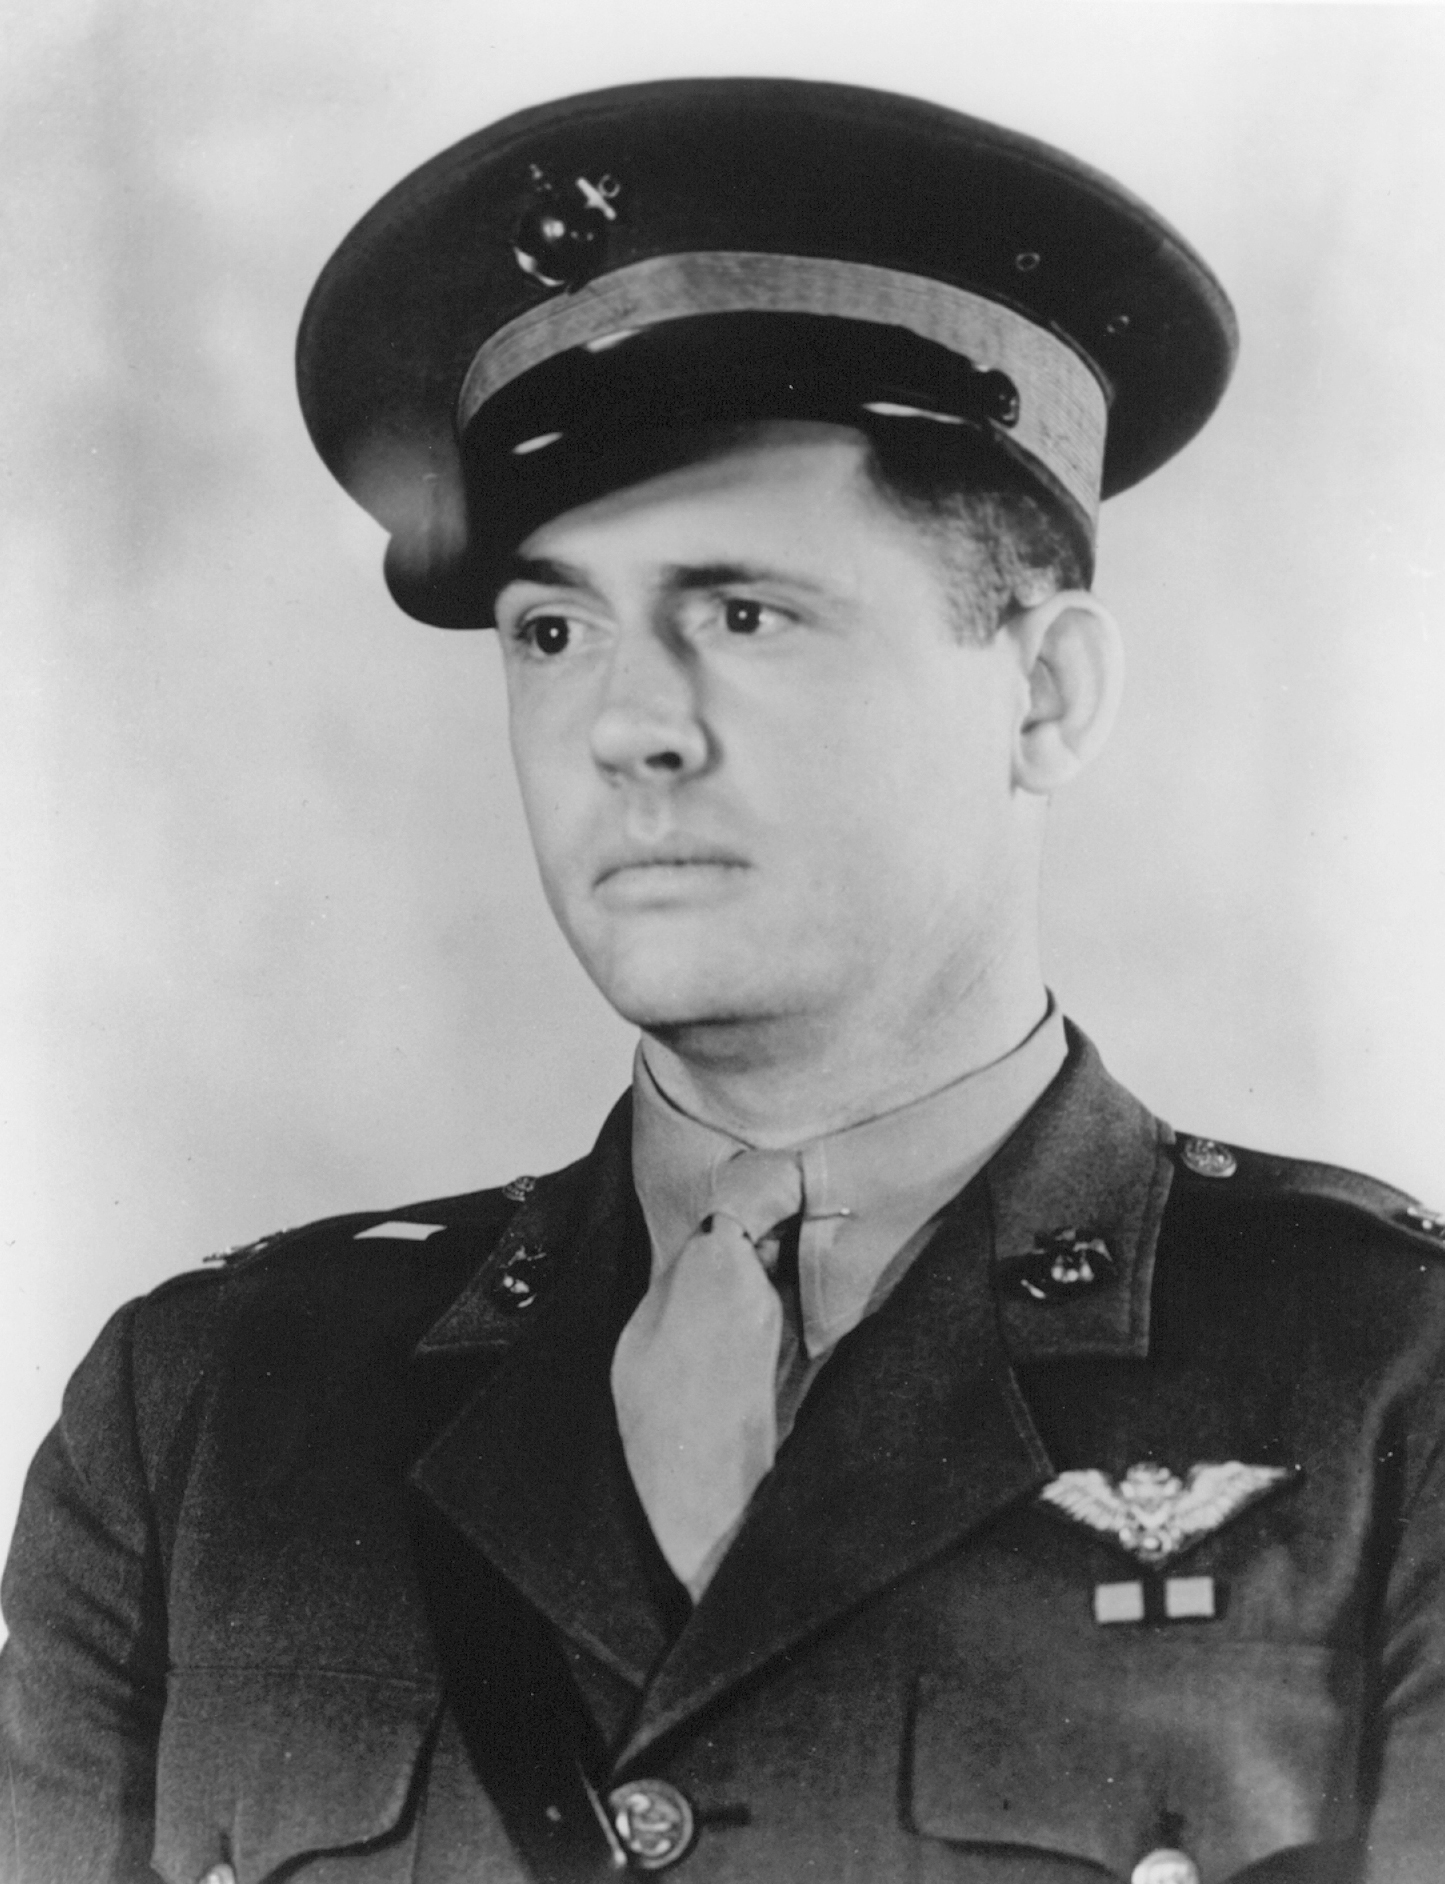 Captain Henry Talmage Elrod, USMC. (1905–1941). Awarded the Medal of Honor, posthumously, for his actions in the defense of Wake Island.